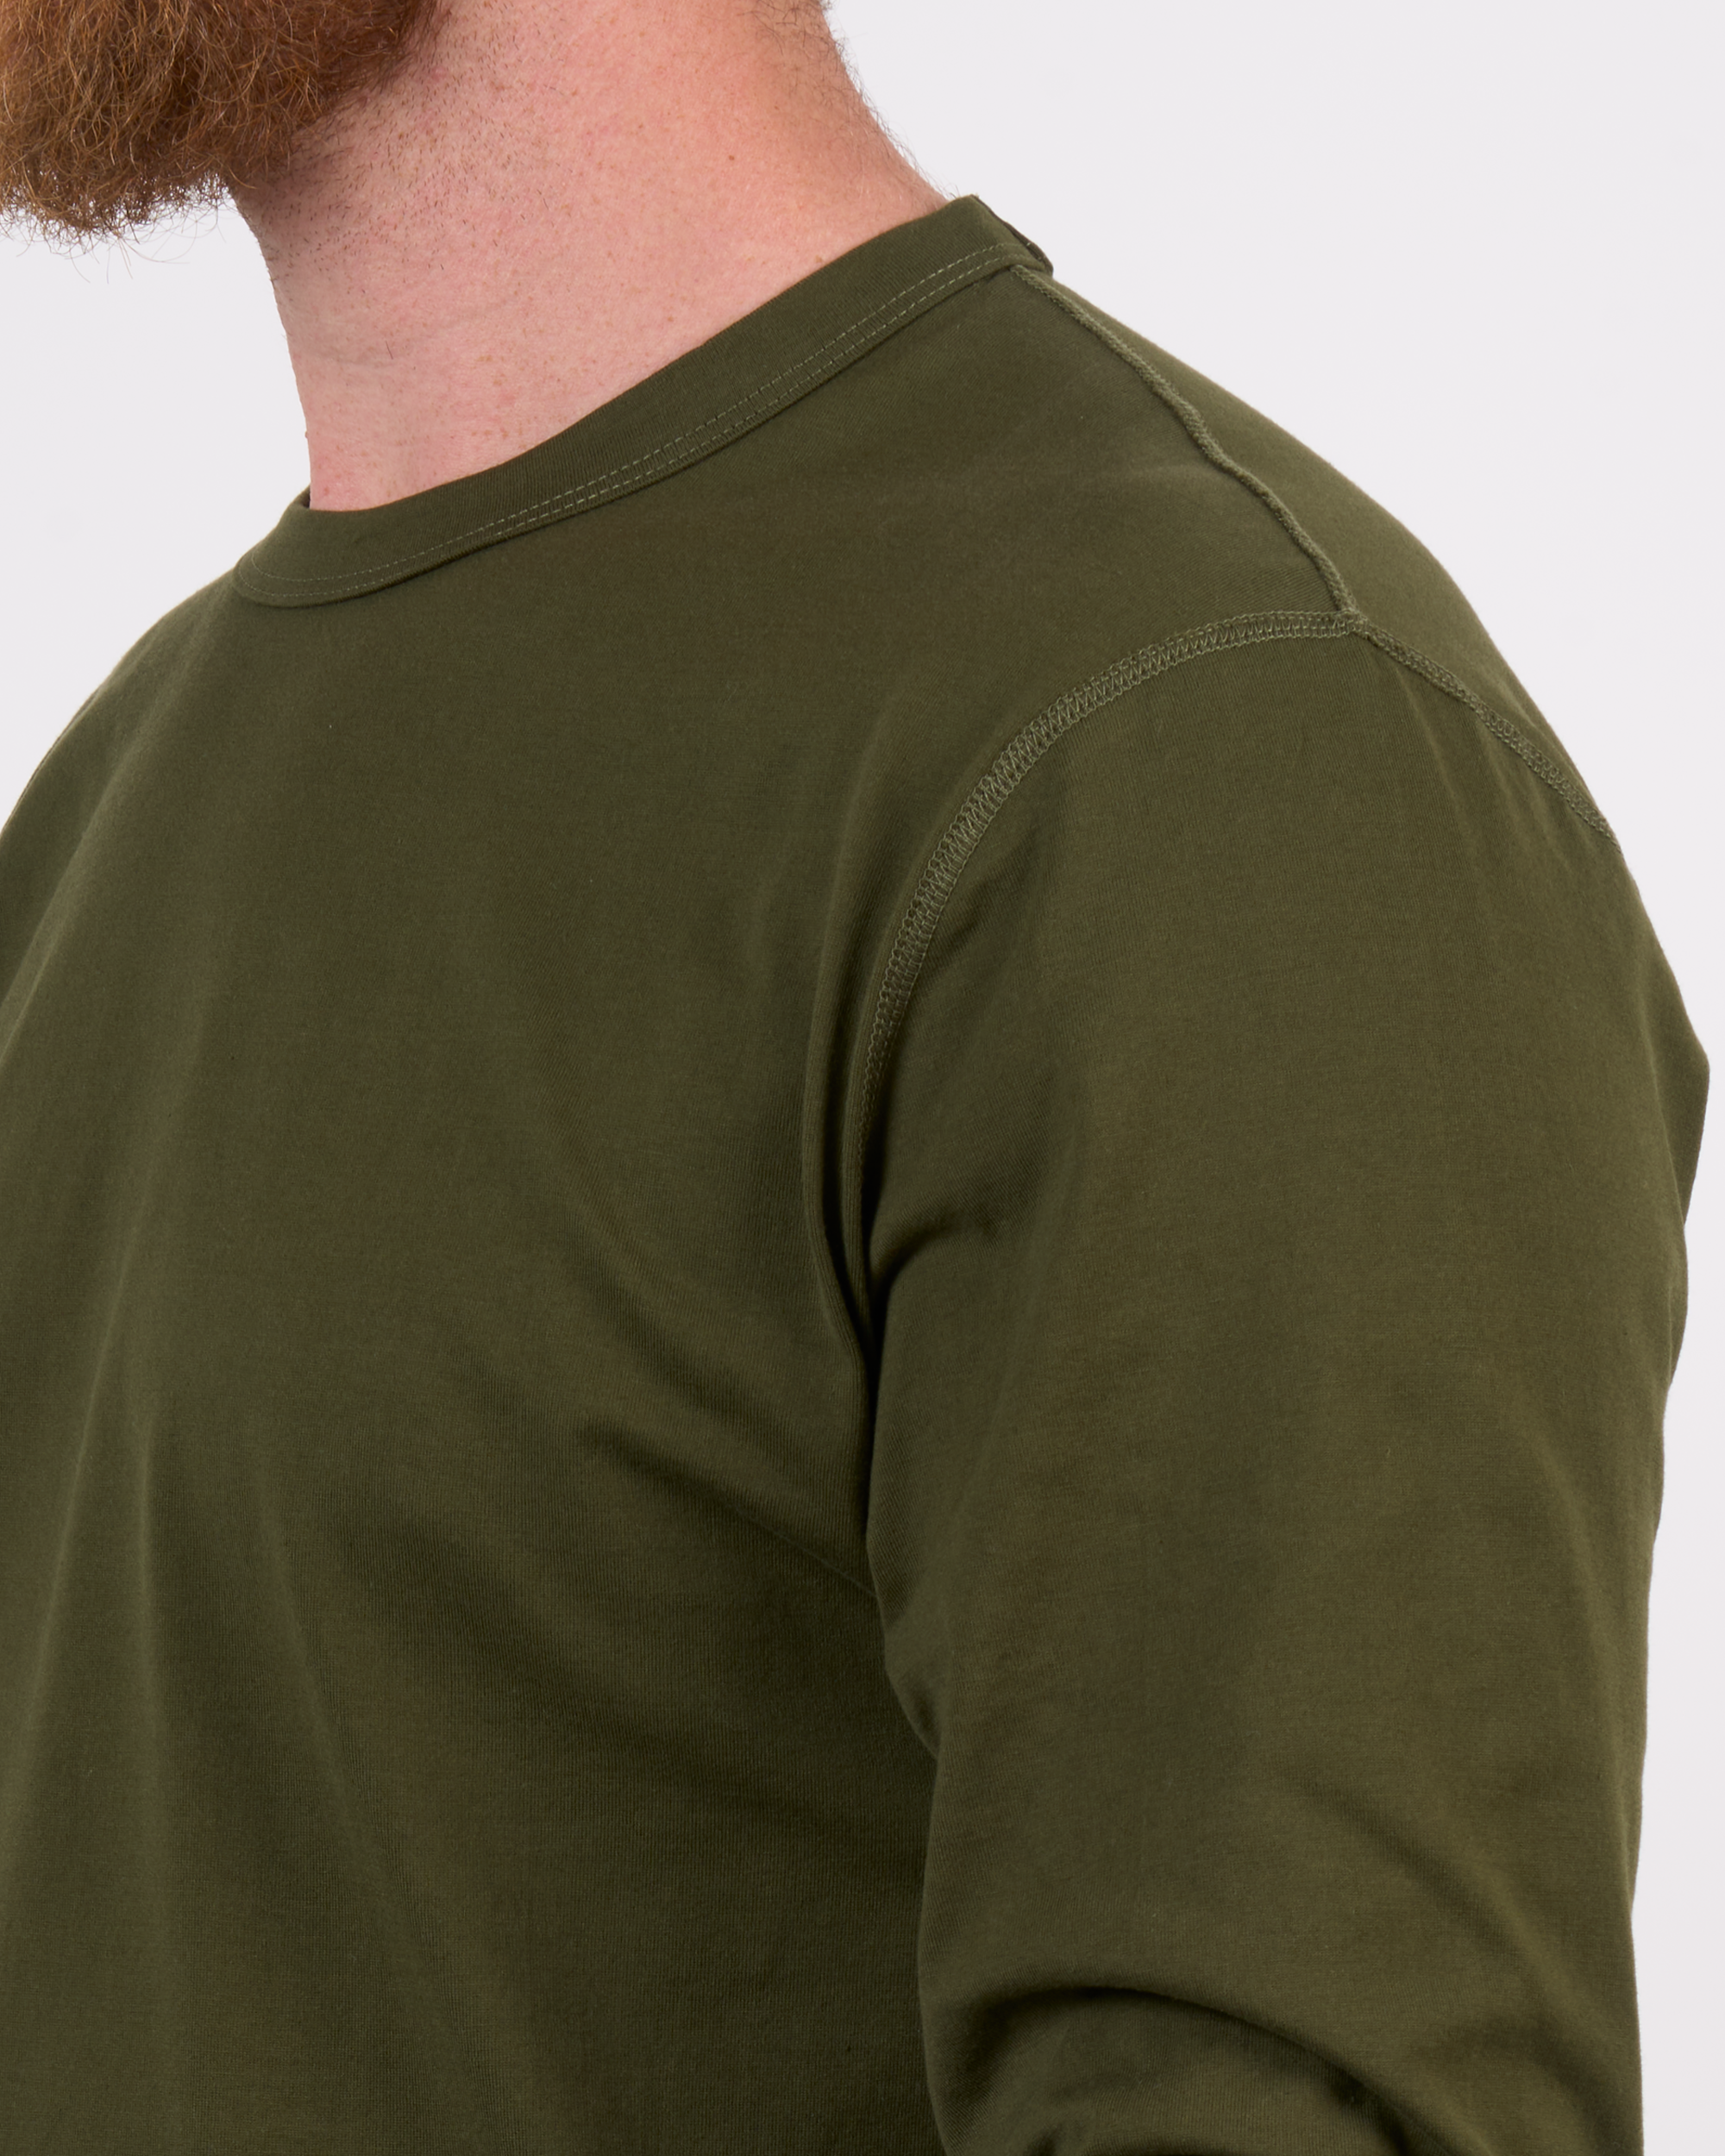 Foreign Rider Co Supima Cotton Olive Long Sleeve T-Shirt Shoulder Flat-lock Stitch Detail